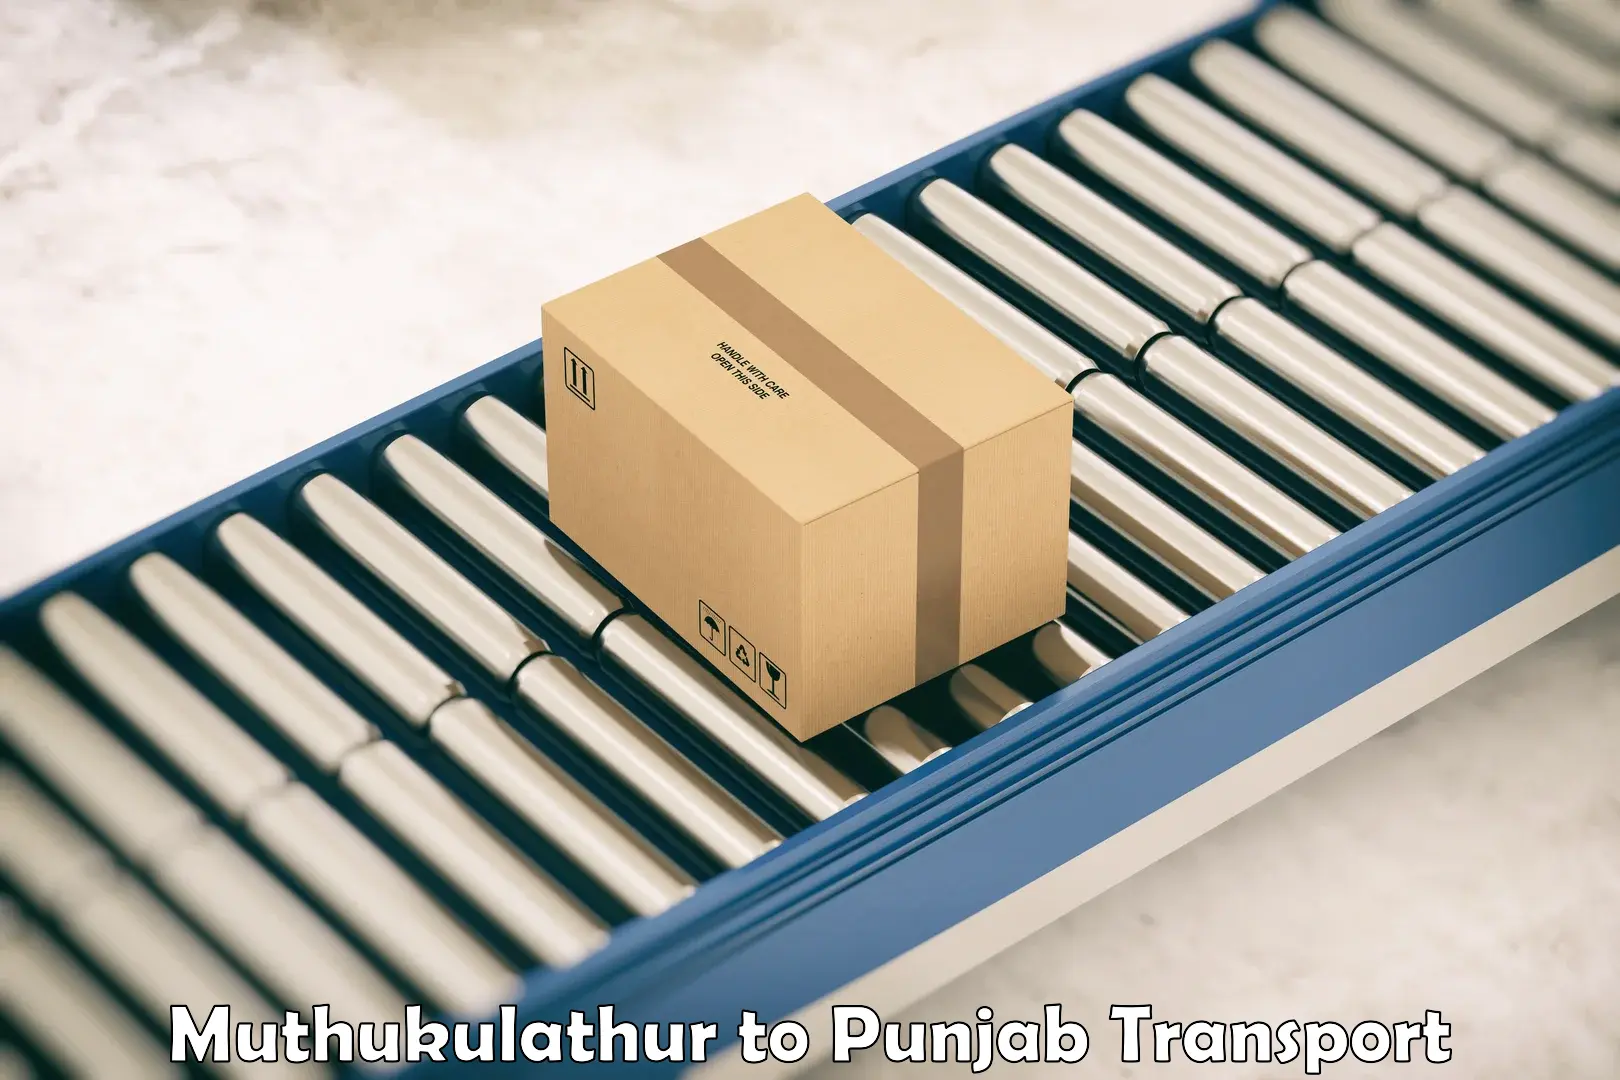 Package delivery services Muthukulathur to Amritsar